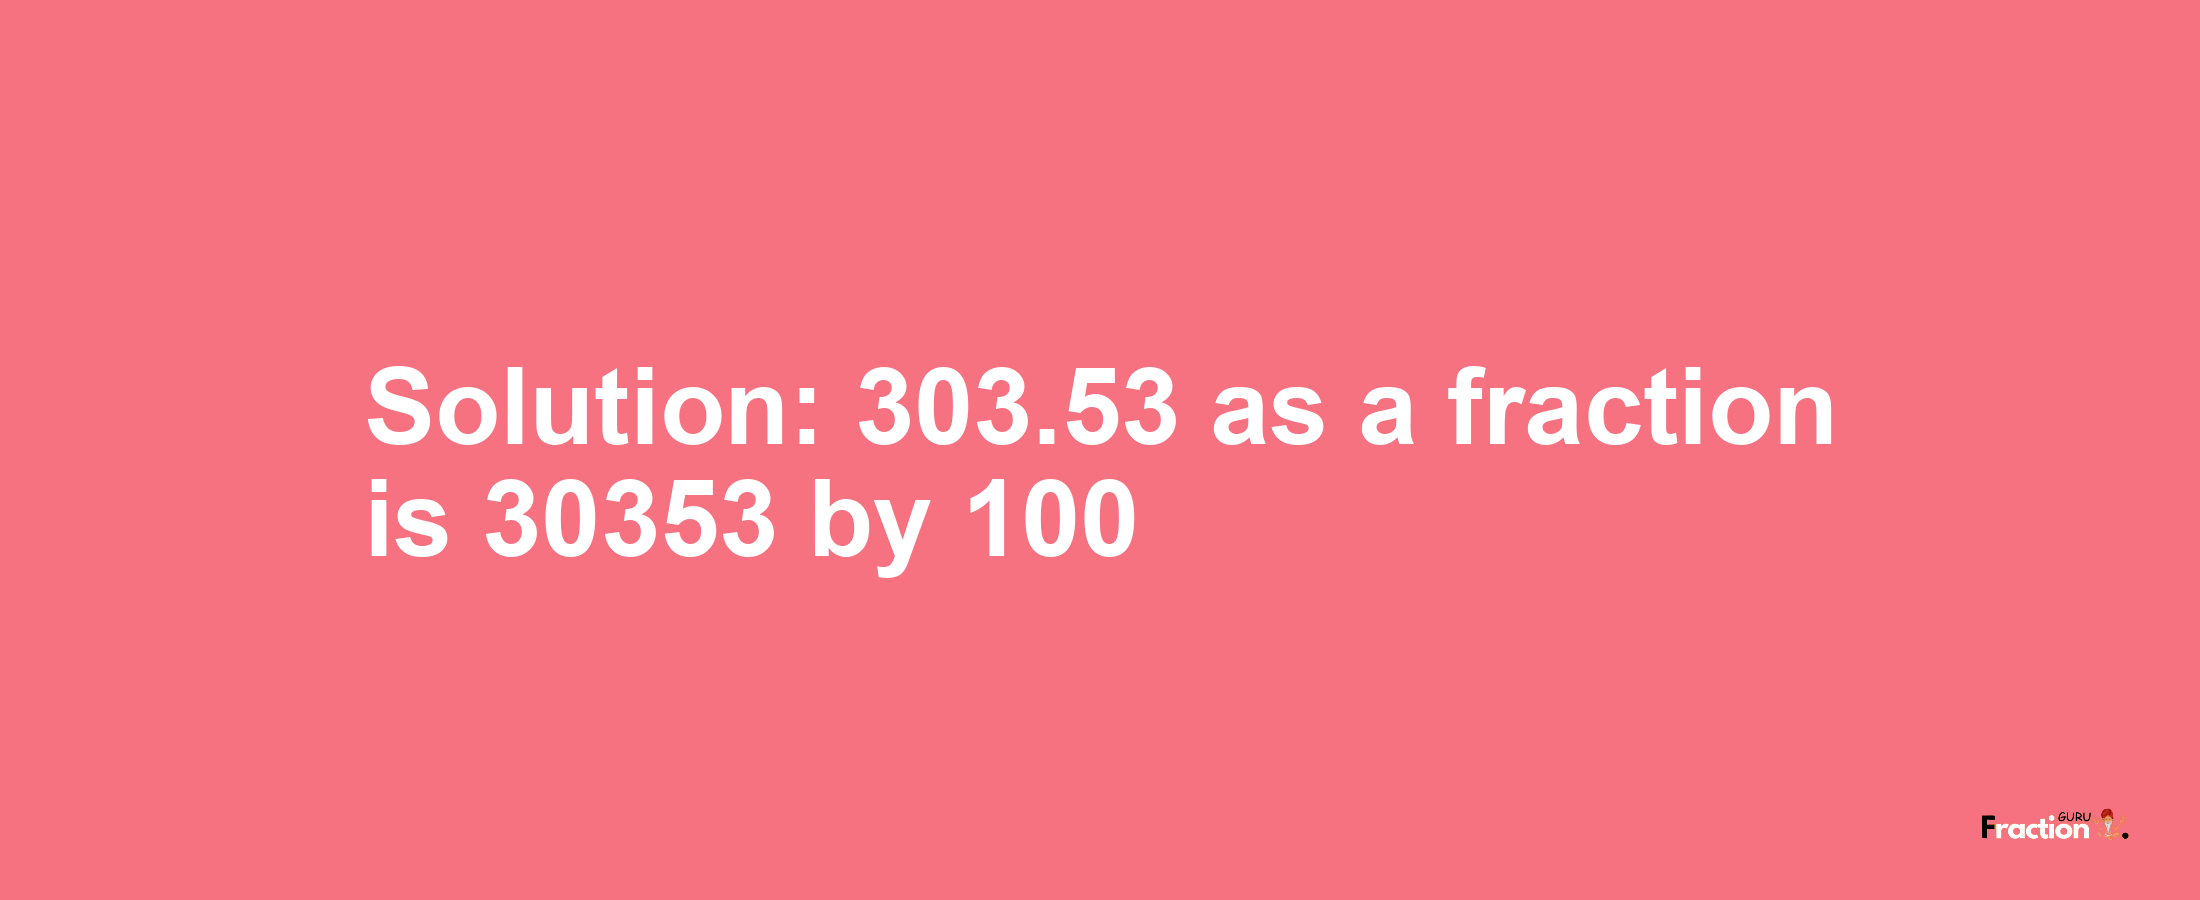 Solution:303.53 as a fraction is 30353/100